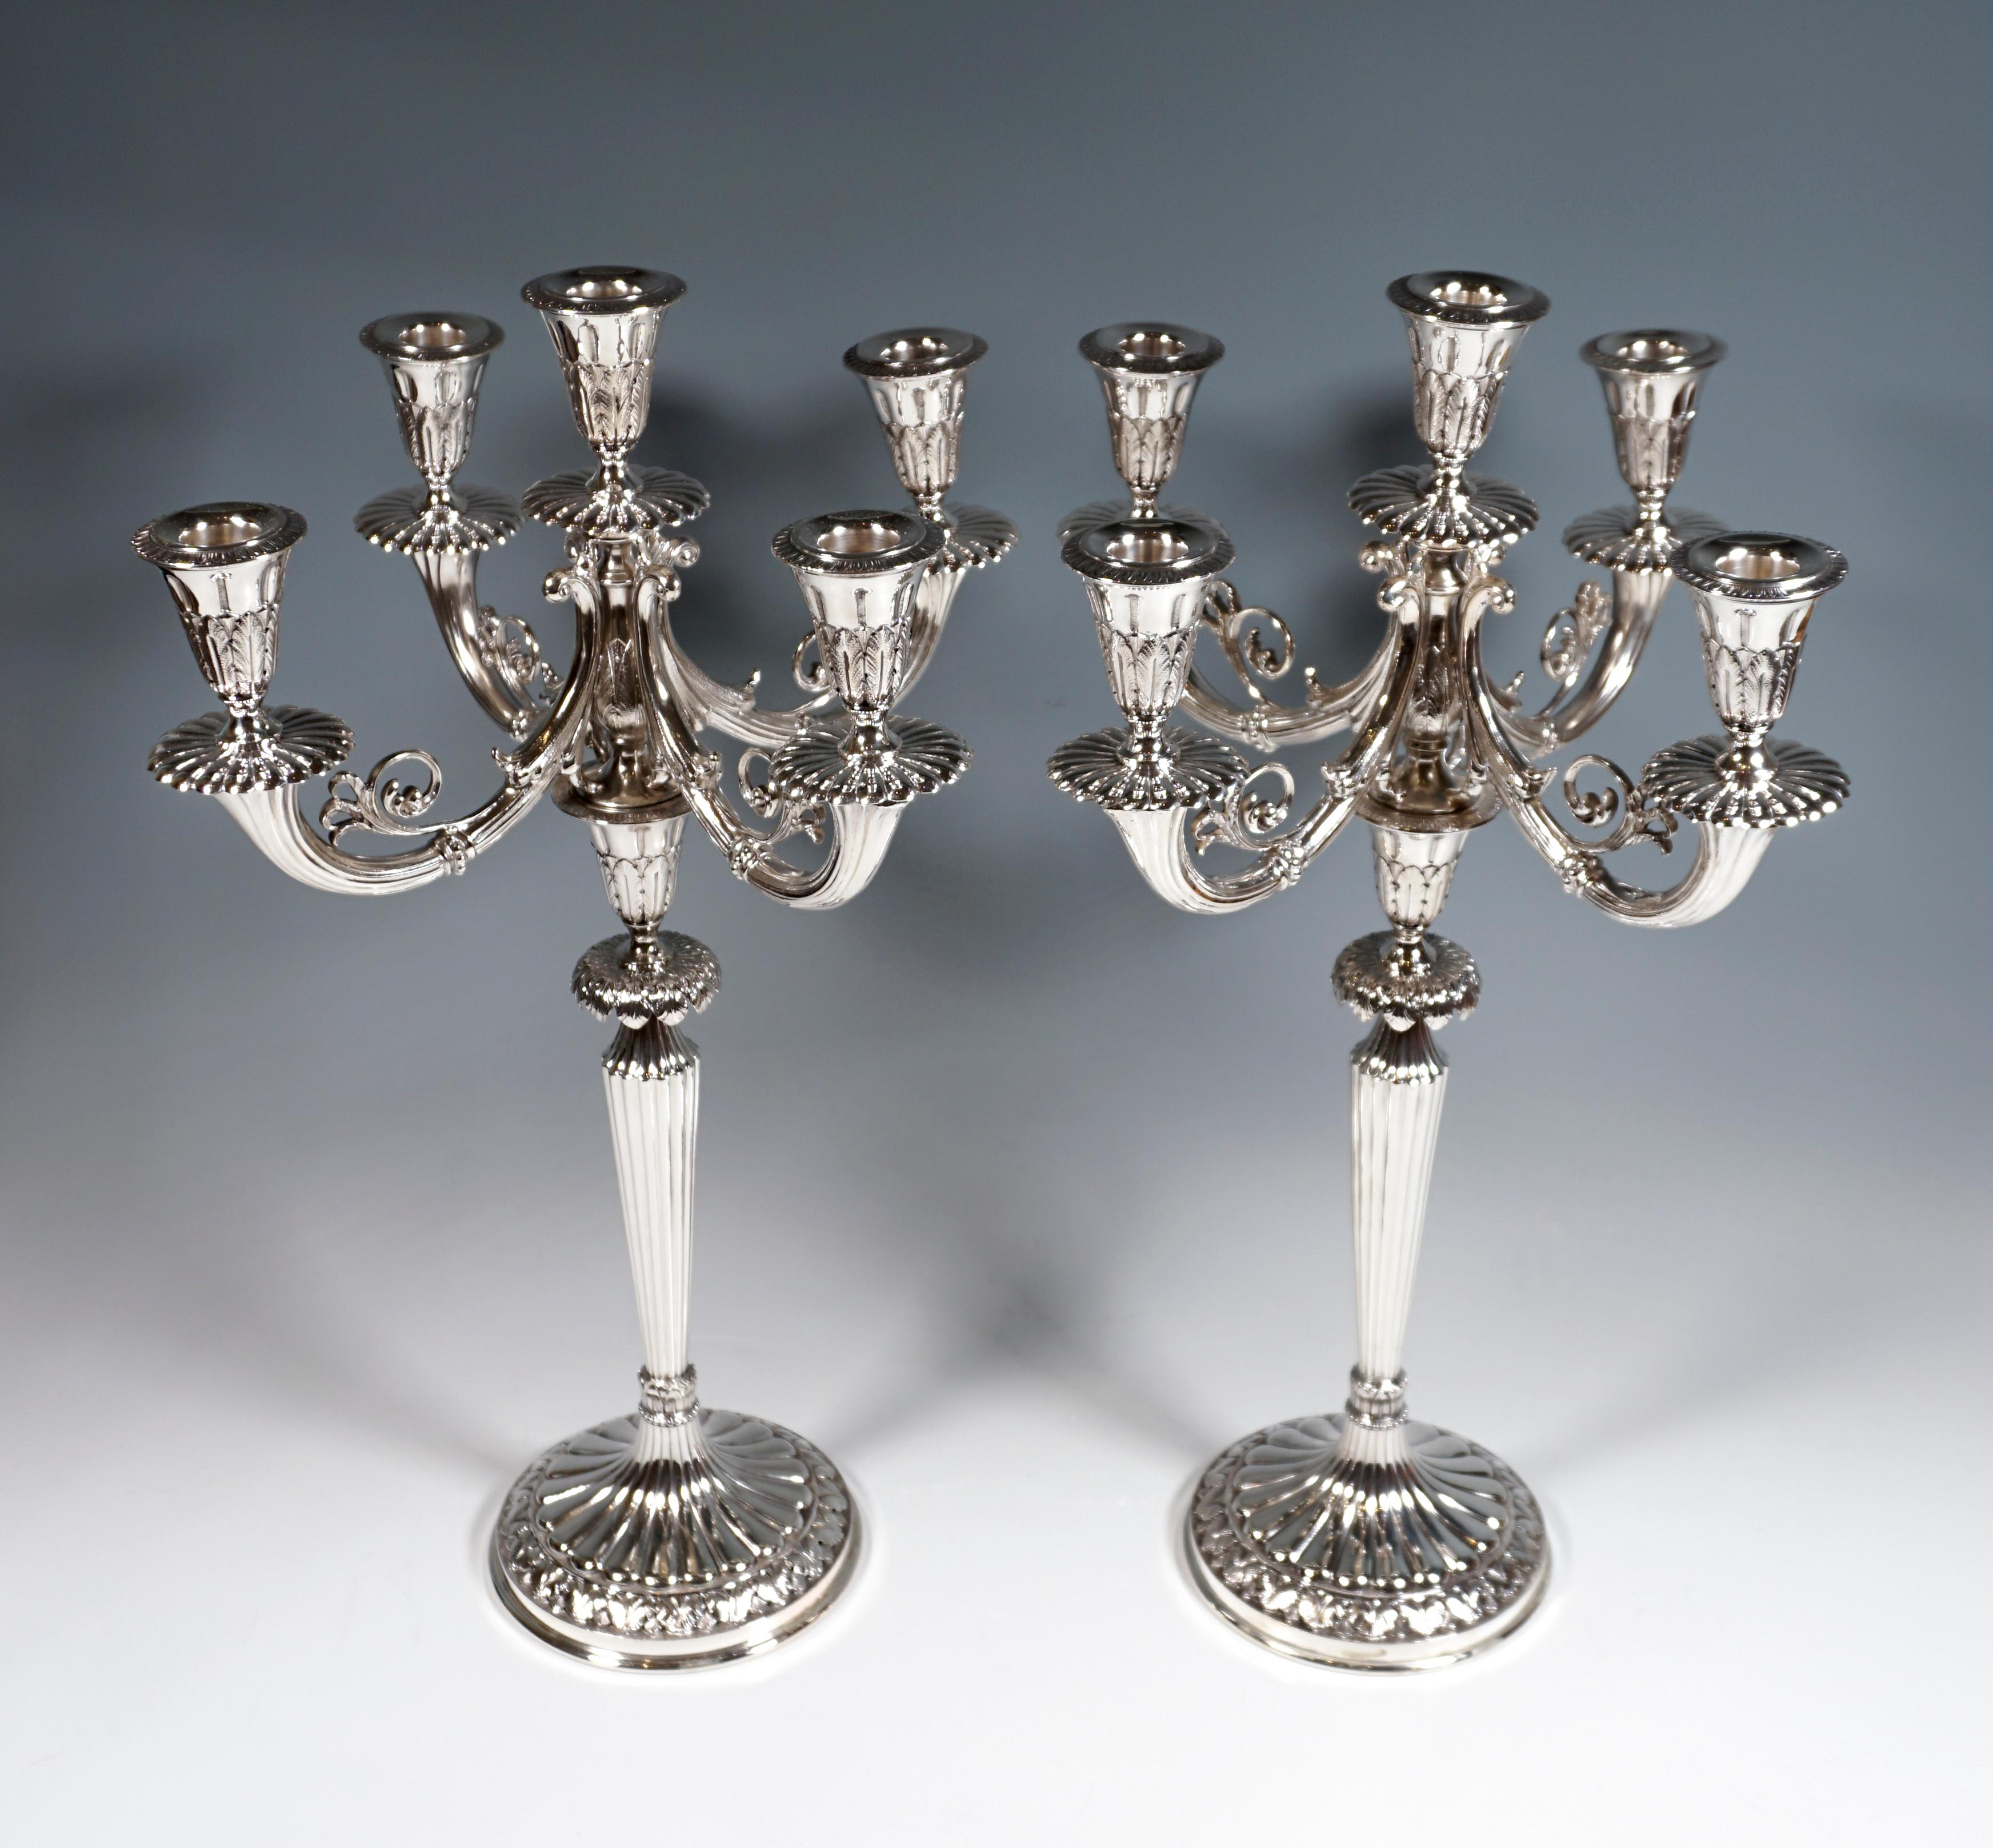 Two five-light candelabras on a round base with a leaf rosette and a raised hump decoration in the middle, bundled by a beaded band and stylized acanthus leaf tips, the hump decoration continued on the shaft that widens conically upwards,